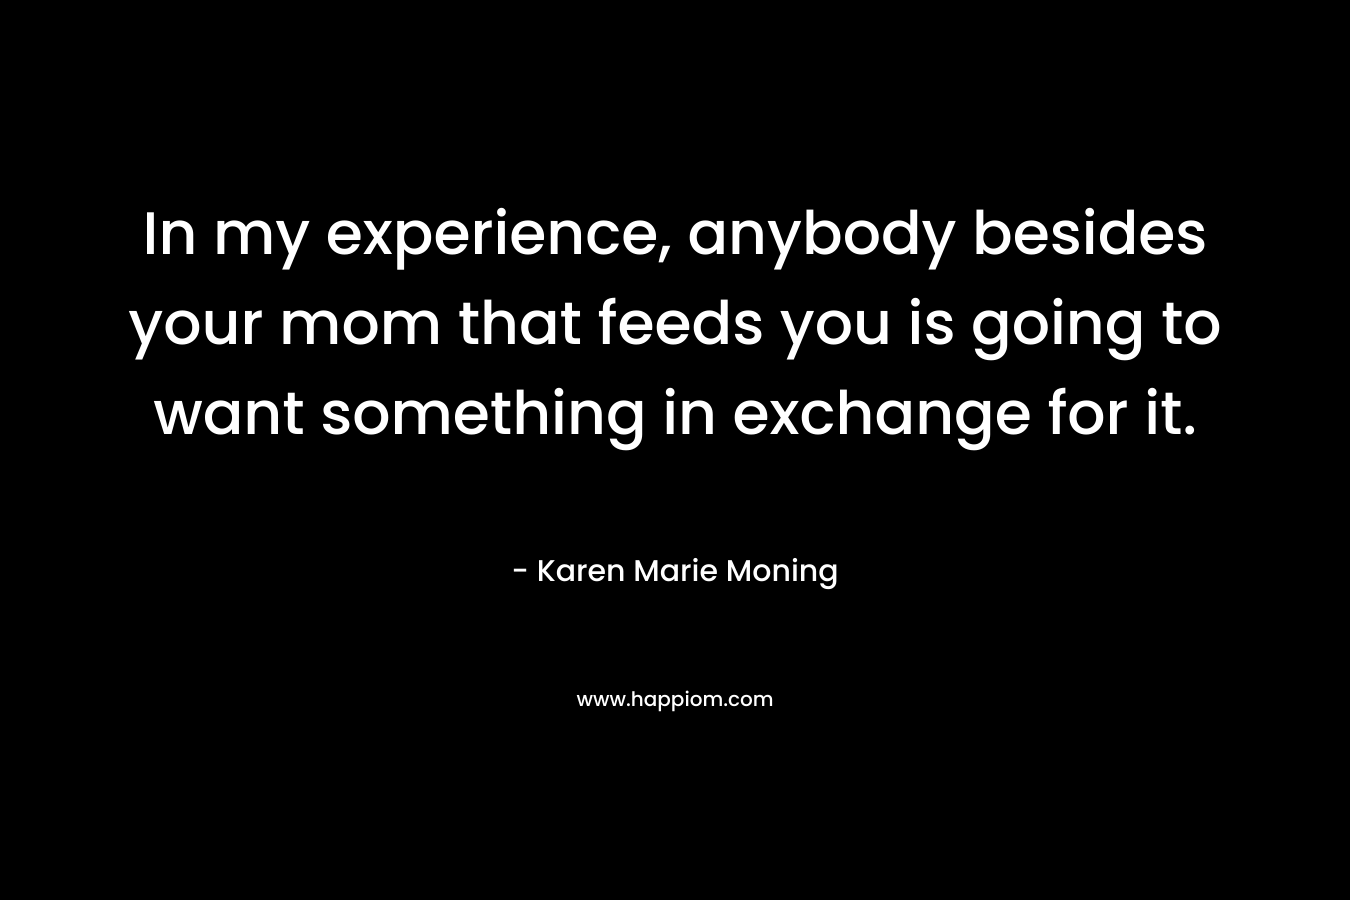 In my experience, anybody besides your mom that feeds you is going to want something in exchange for it.